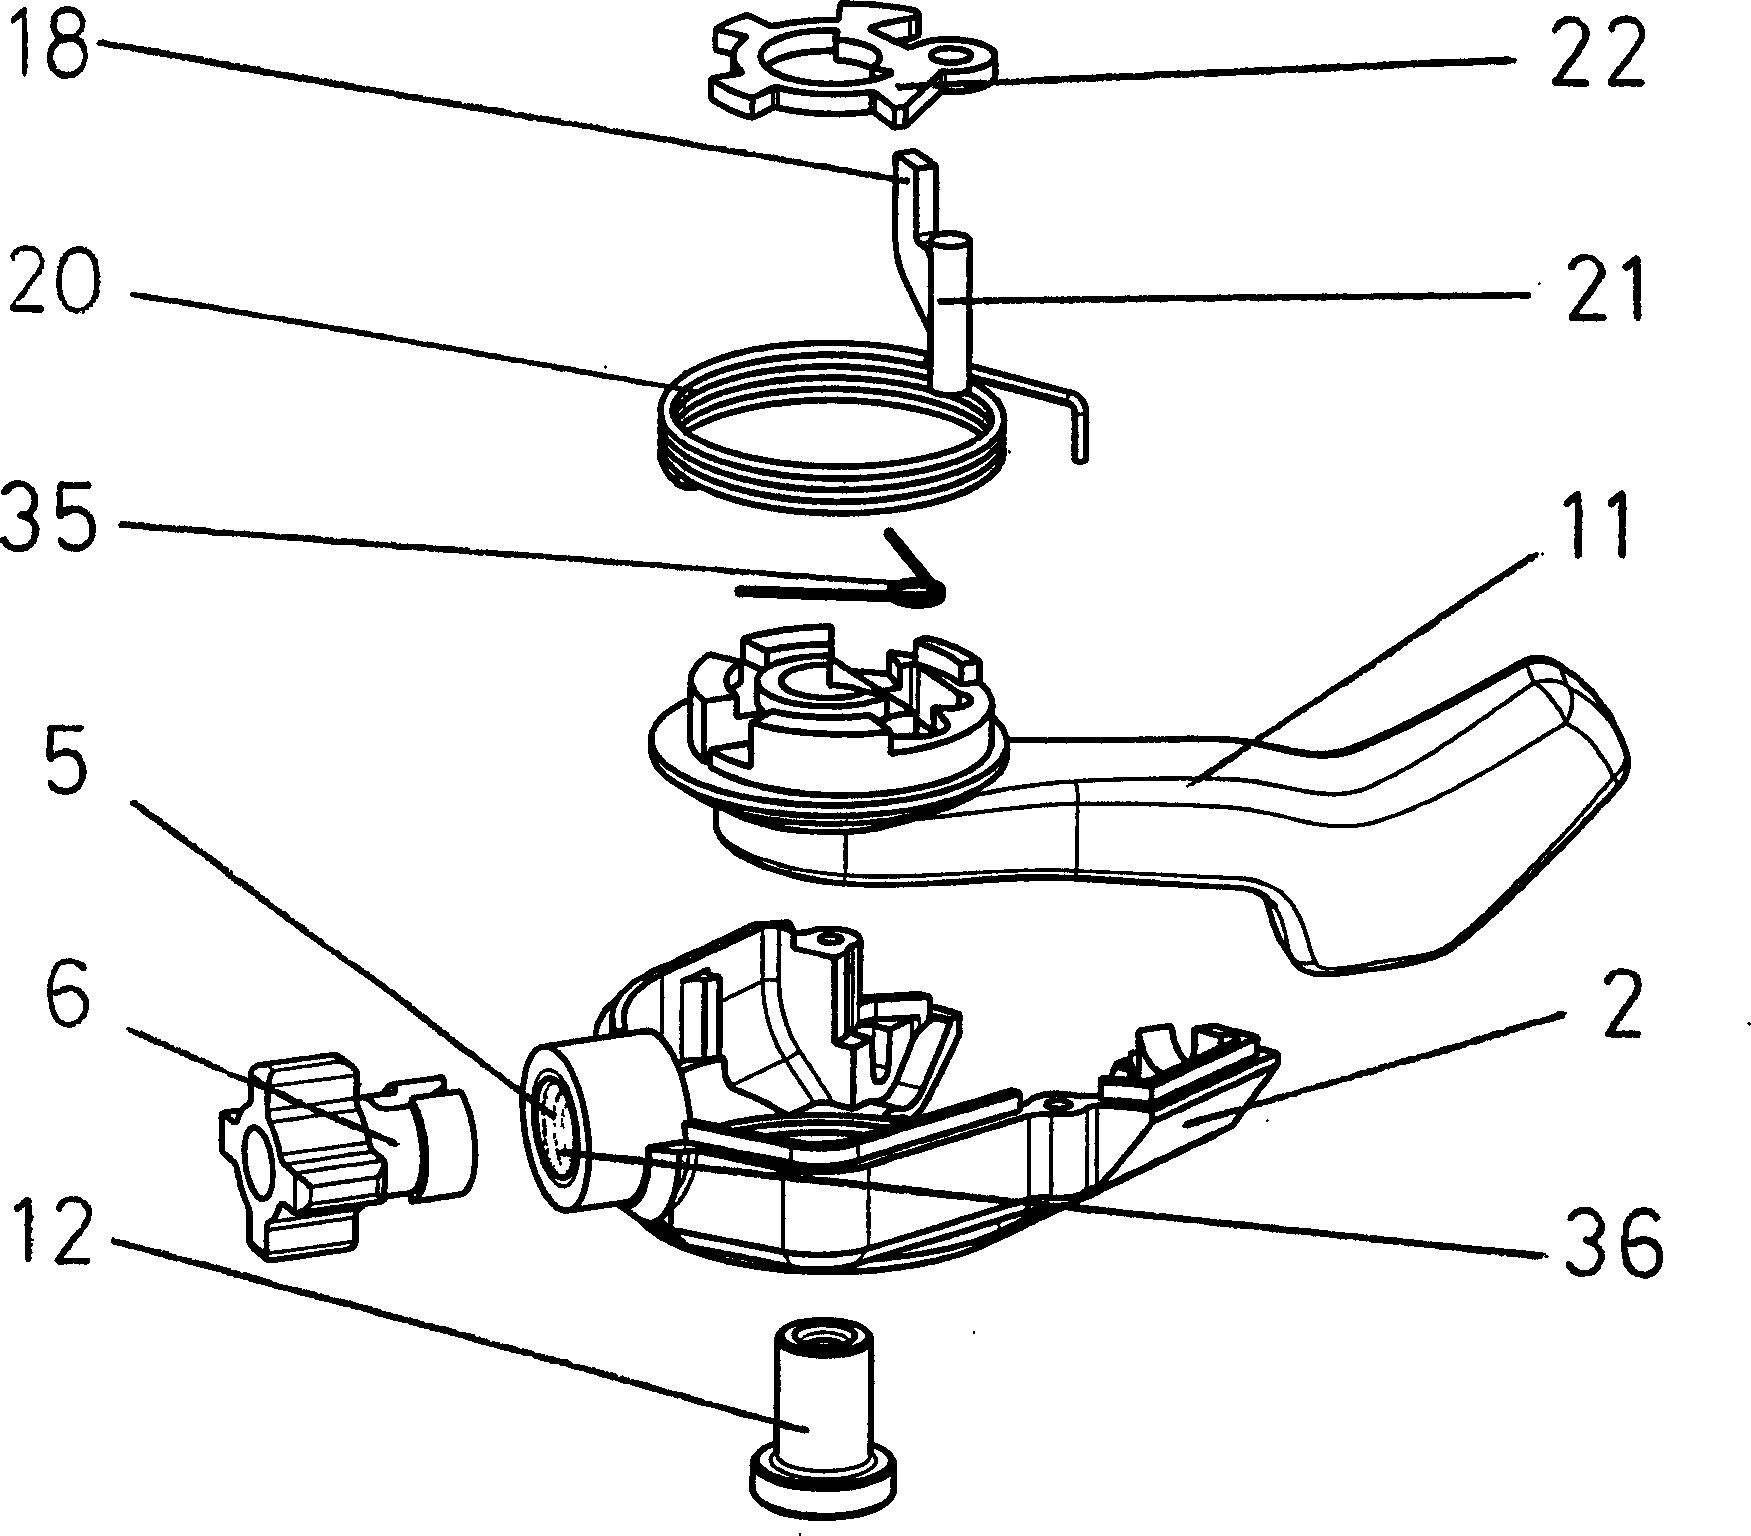 Steel cable tension mechanism for handle-type gear changer